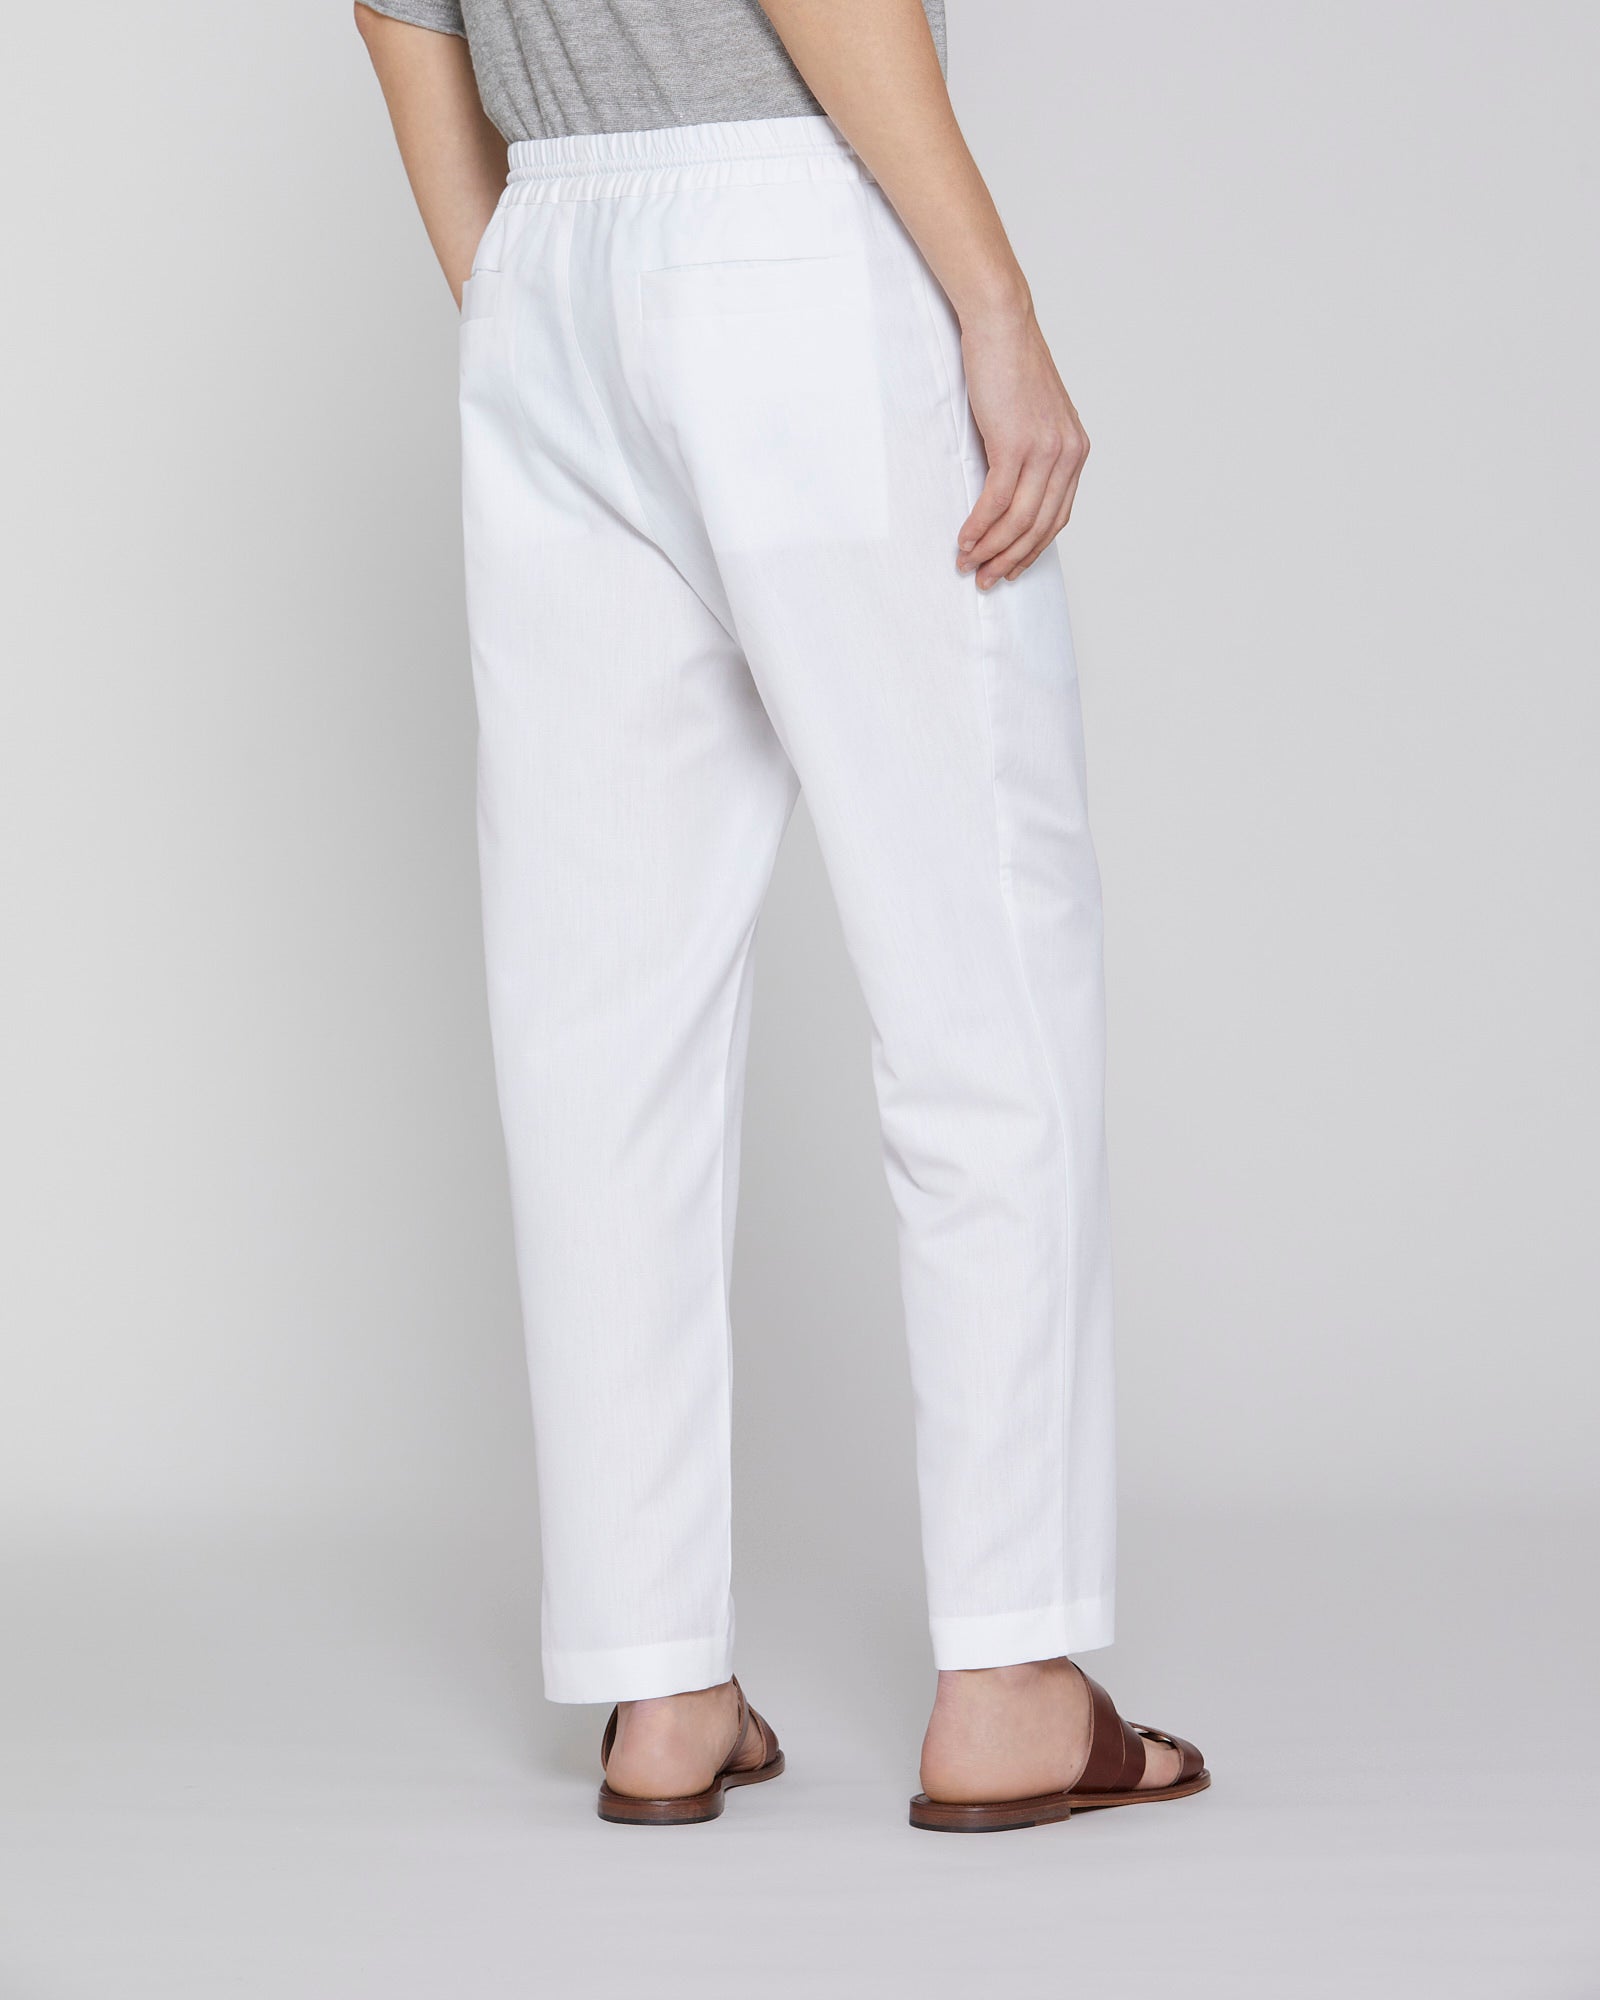 Slim fit cotton and linen trousers